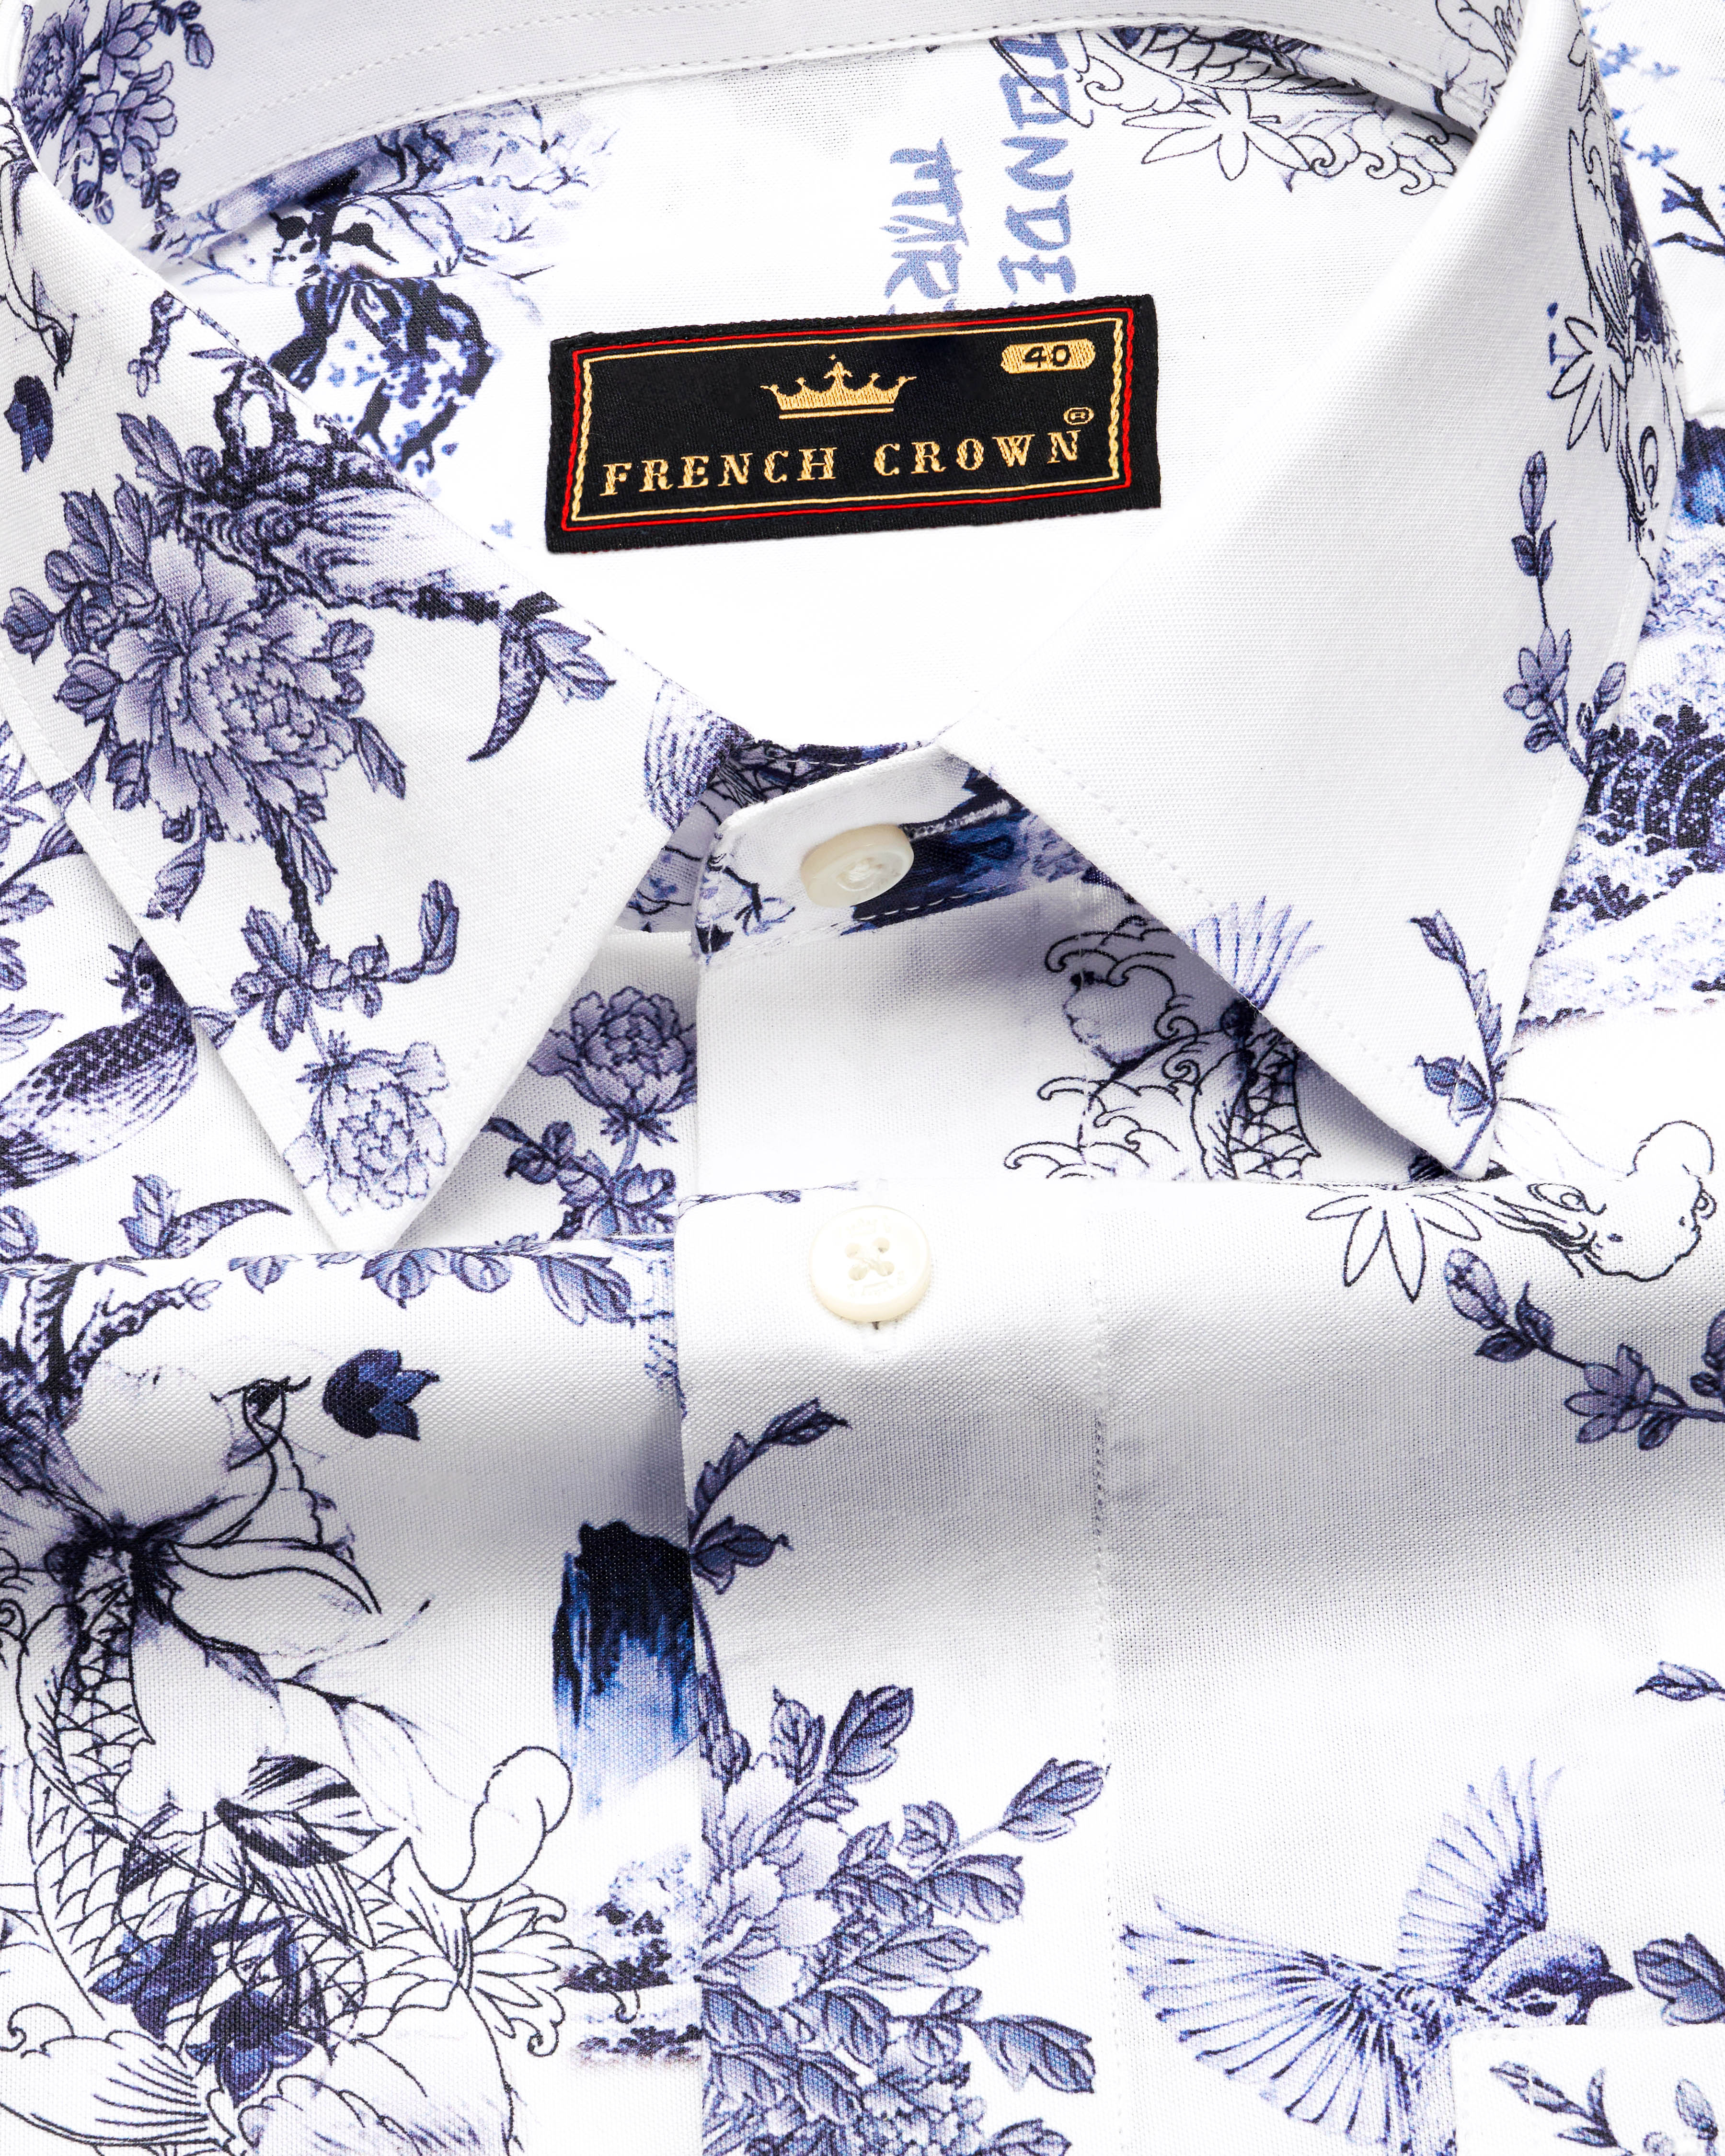 Bright White with Mulled Blue Printed Premium Cotton Shirt 9722-38, 9722-H-38, 9722-39, 9722-H-39, 9722-40, 9722-H-40, 9722-42, 9722-H-42, 9722-44, 9722-H-44, 9722-46, 9722-H-46, 9722-48, 9722-H-48, 9722-50, 9722-H-50, 9722-52, 9722-H-52